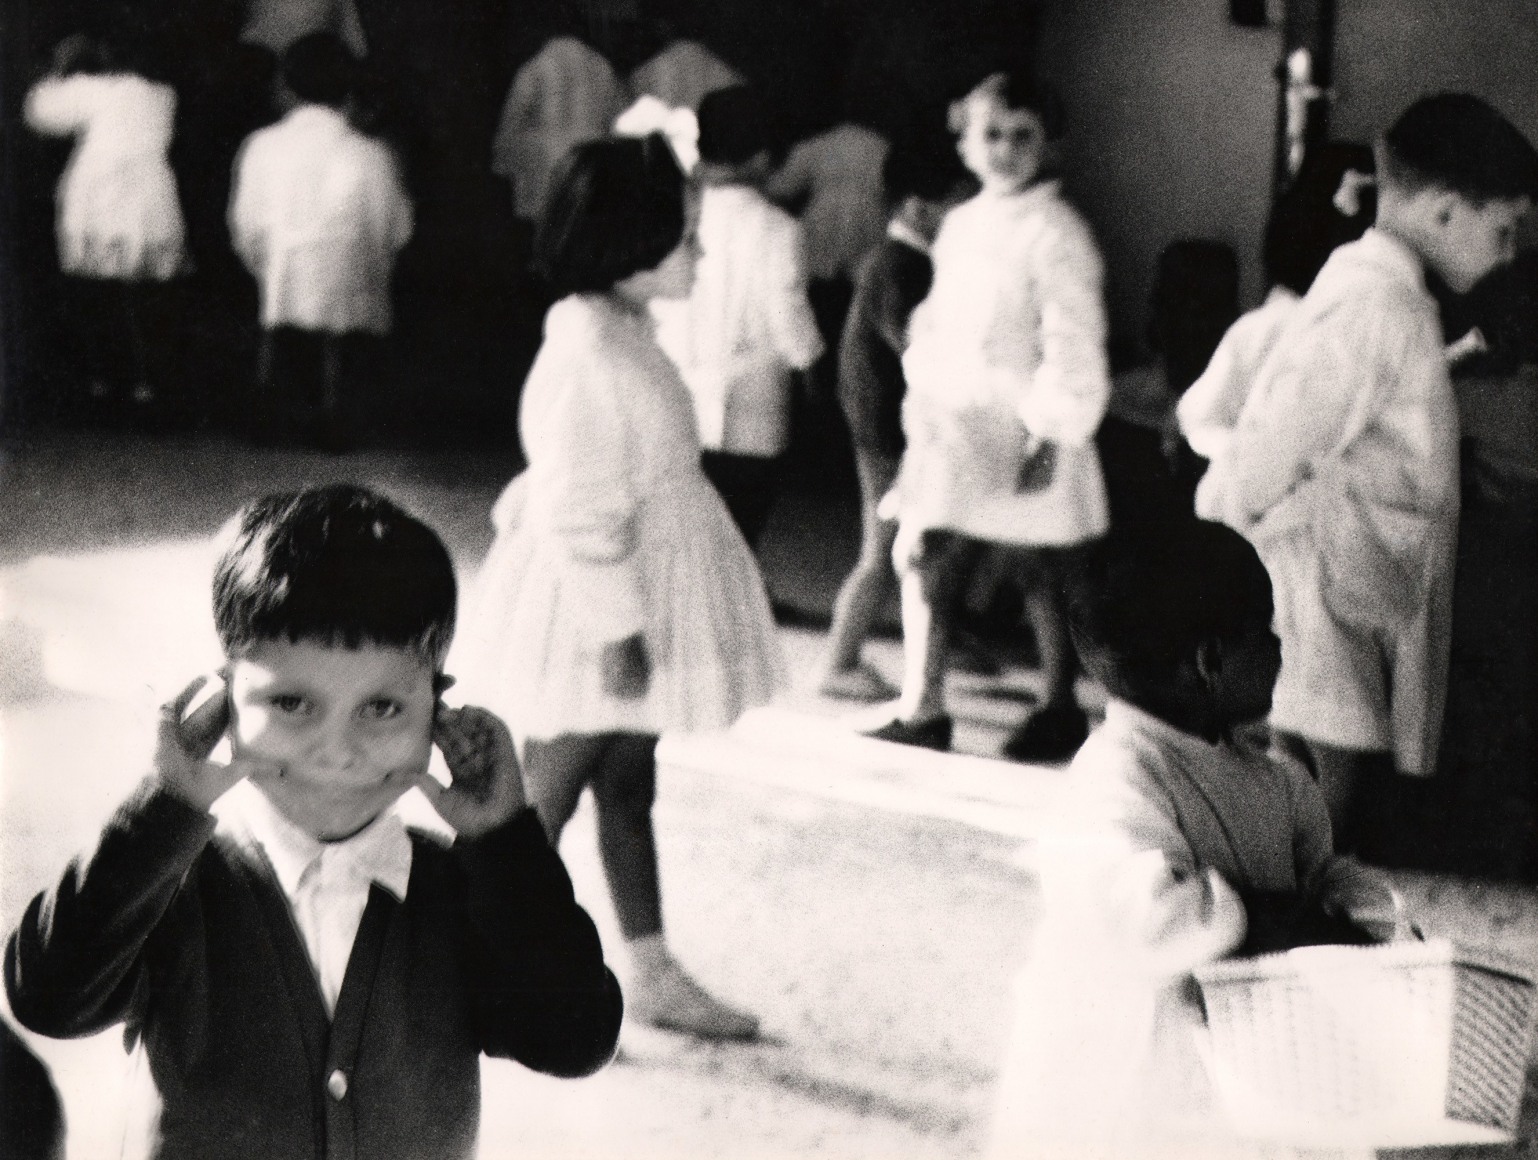 17. Renzo Tortelli, Piccolo Mondo, 1958&ndash;1959. High contrast image. A small boy in the lower left of the frame distorts his face using his hands. Various out-of-focus children play in the background.